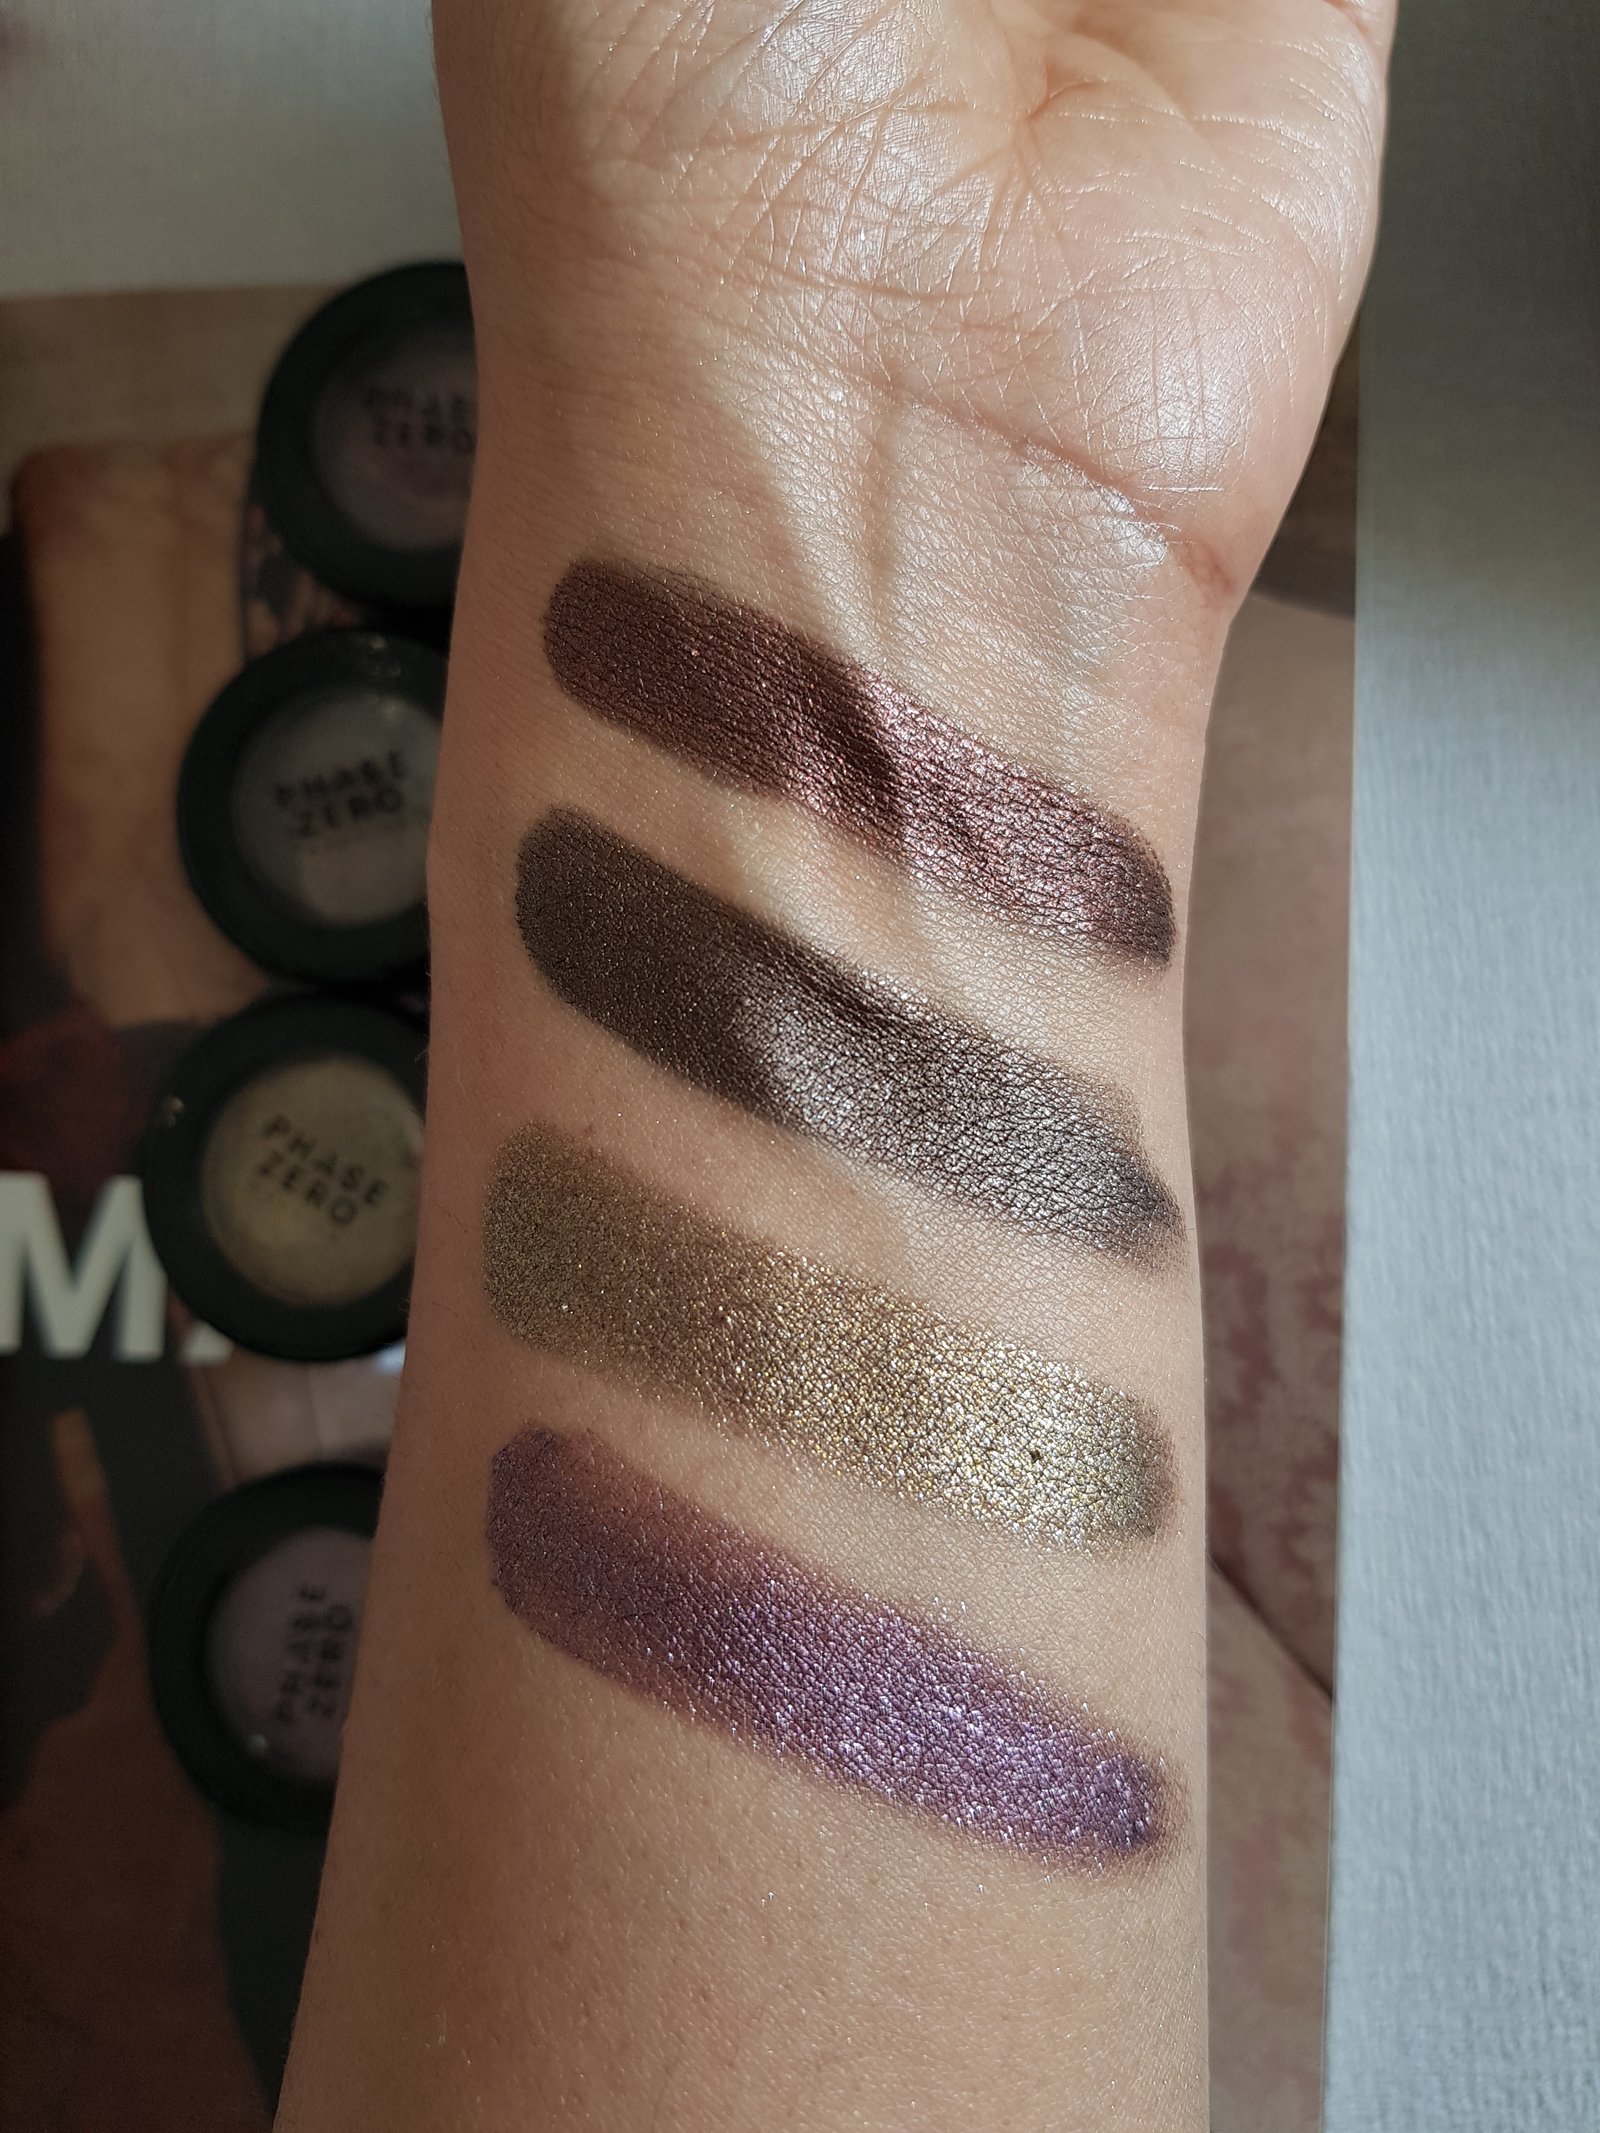 Metal Foil Eyeshadows swatches from Phase Zero Makeup - Left to Right (Goth Girl, Dark Knight, Army, Rockstar) - Ms Tantrum Blog